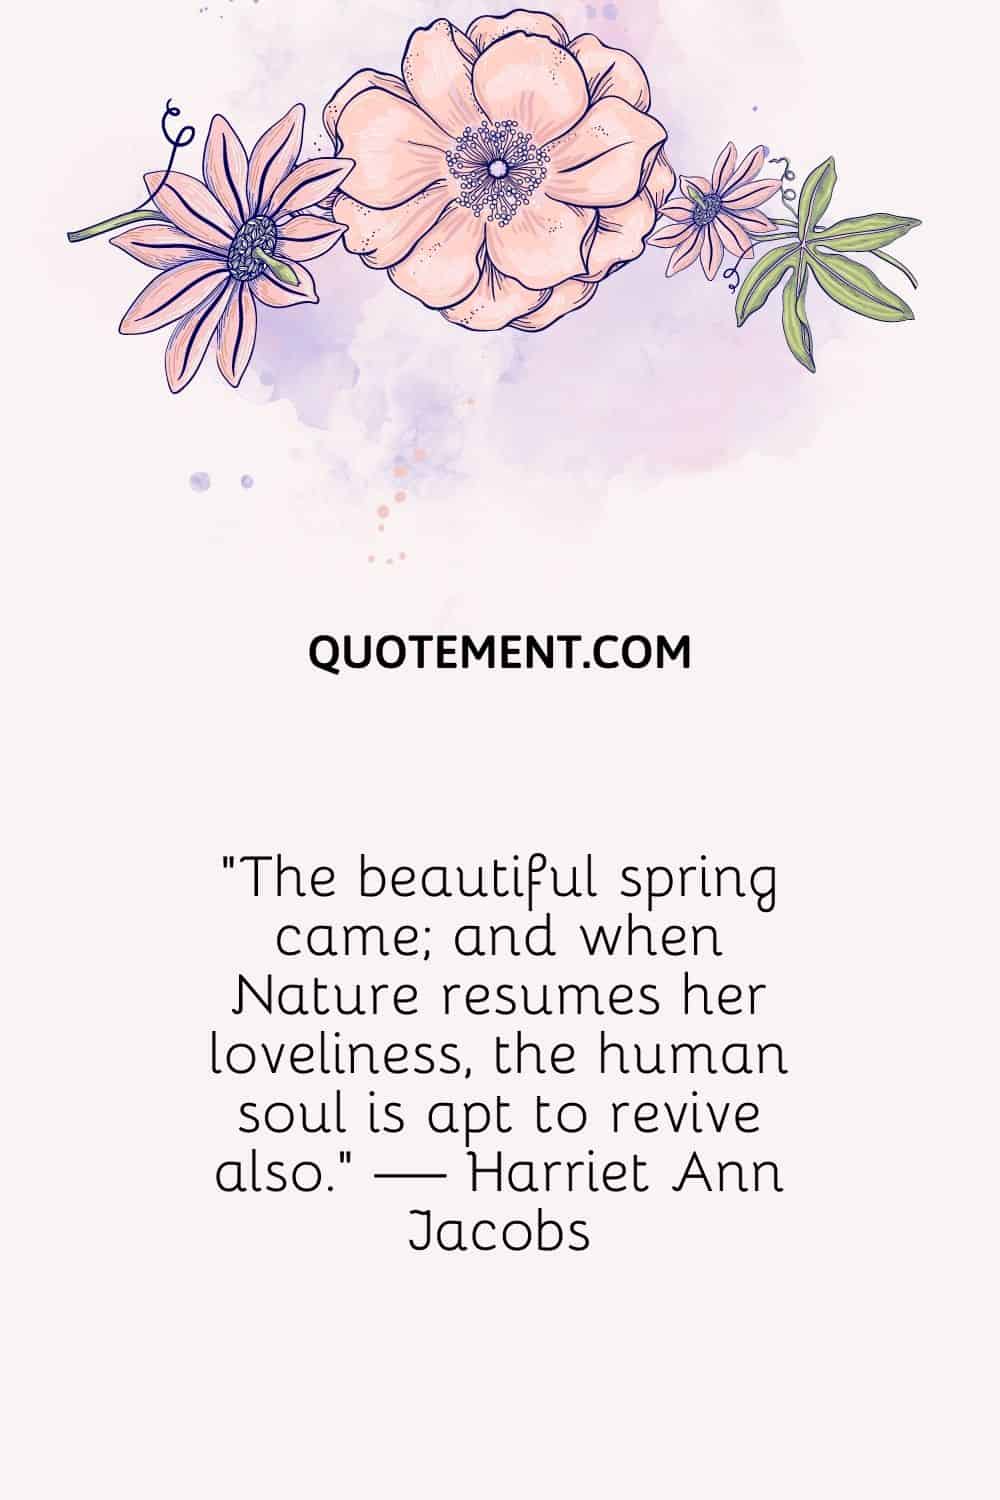 “The beautiful spring came; and when Nature resumes her loveliness, the human soul is apt to revive also.” — Harriet Ann Jacobs